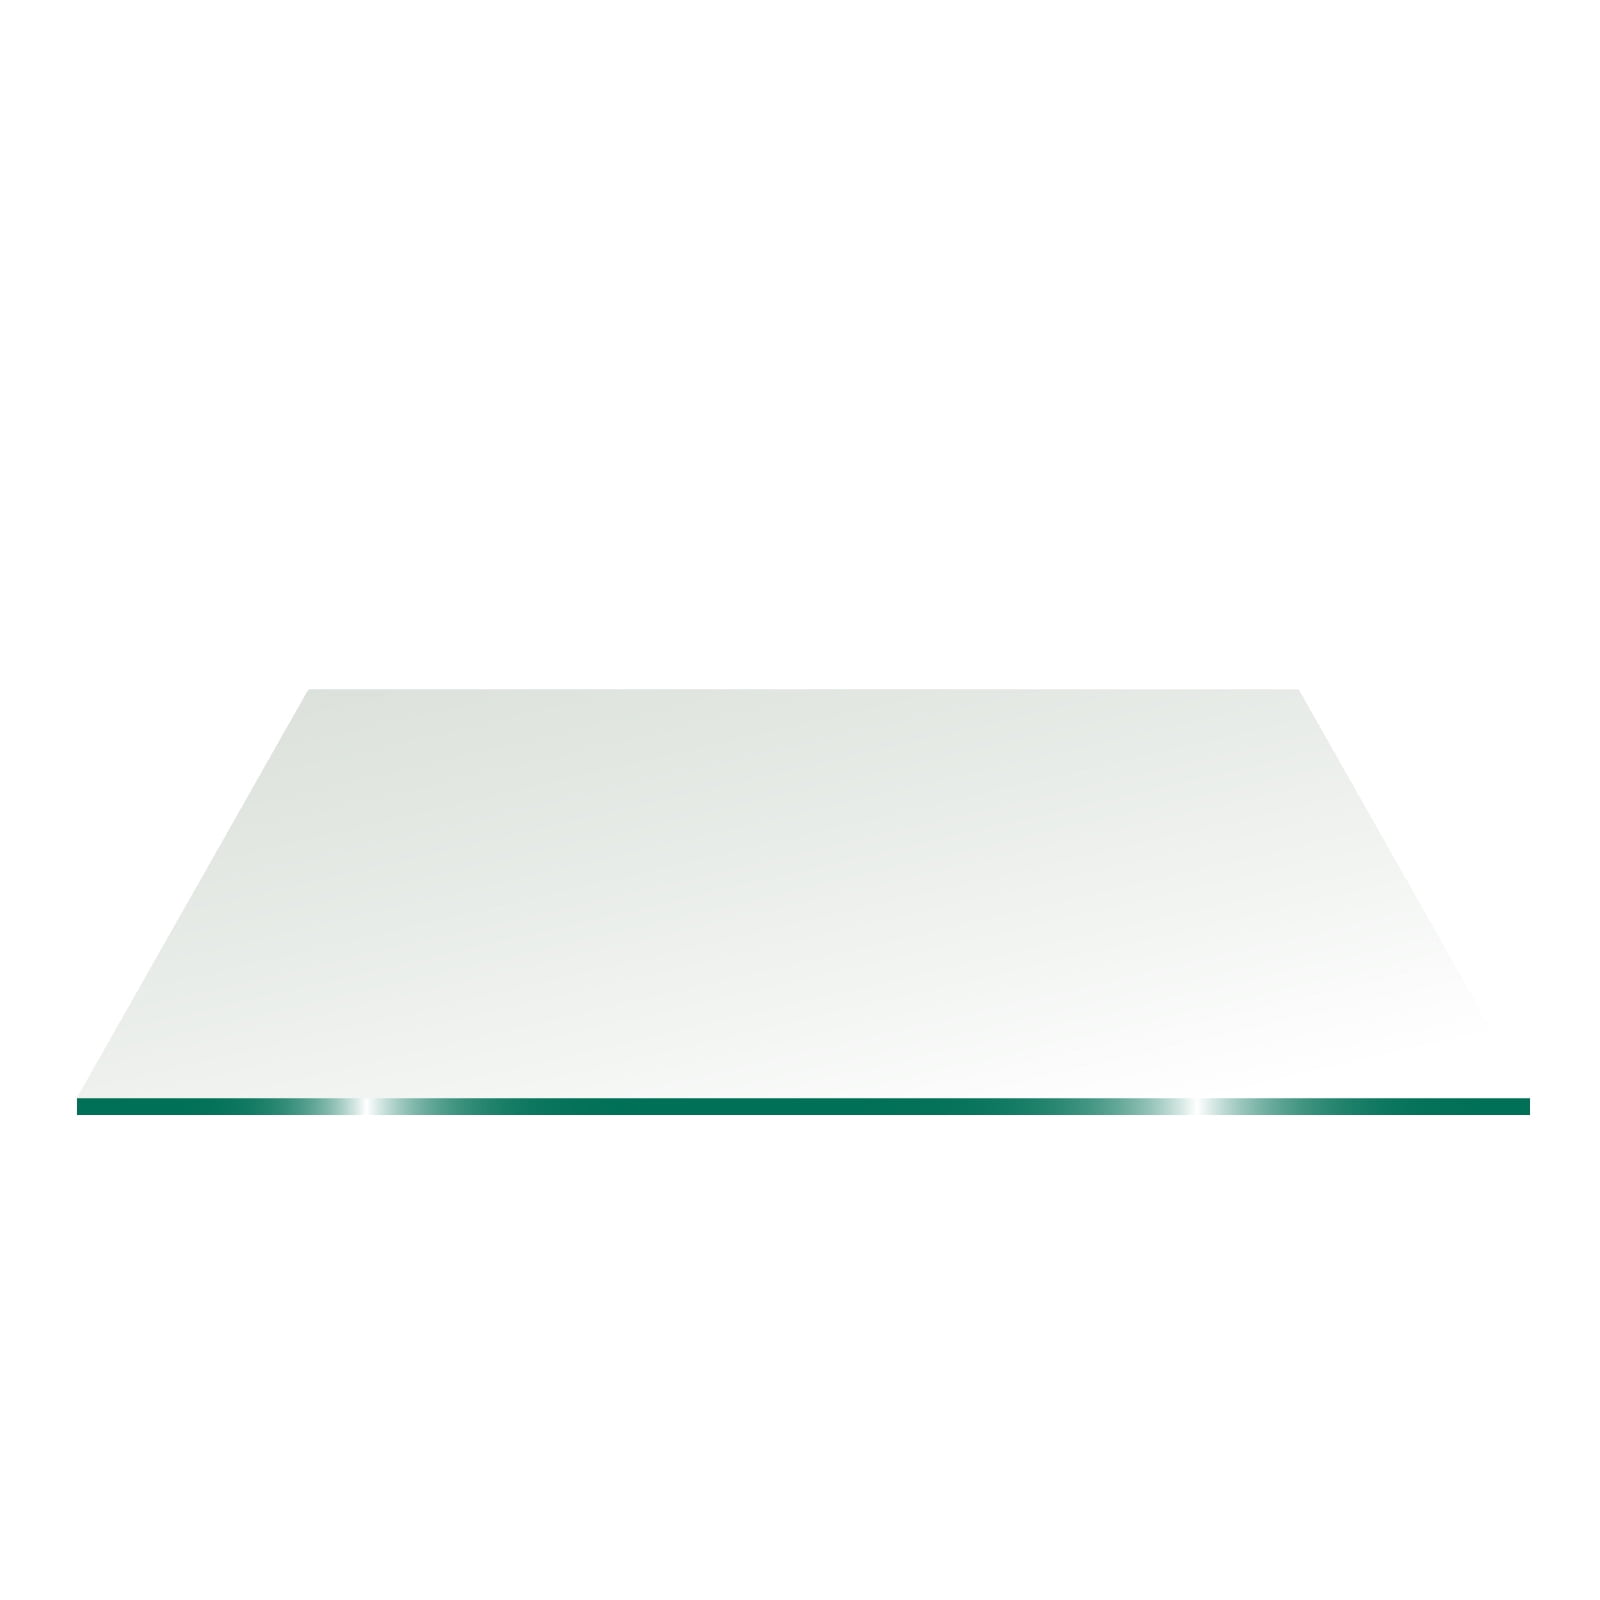 14" x 30" Rectangle Glass Top 3/8" Thick Flat Polish Edge with Touch Corners 